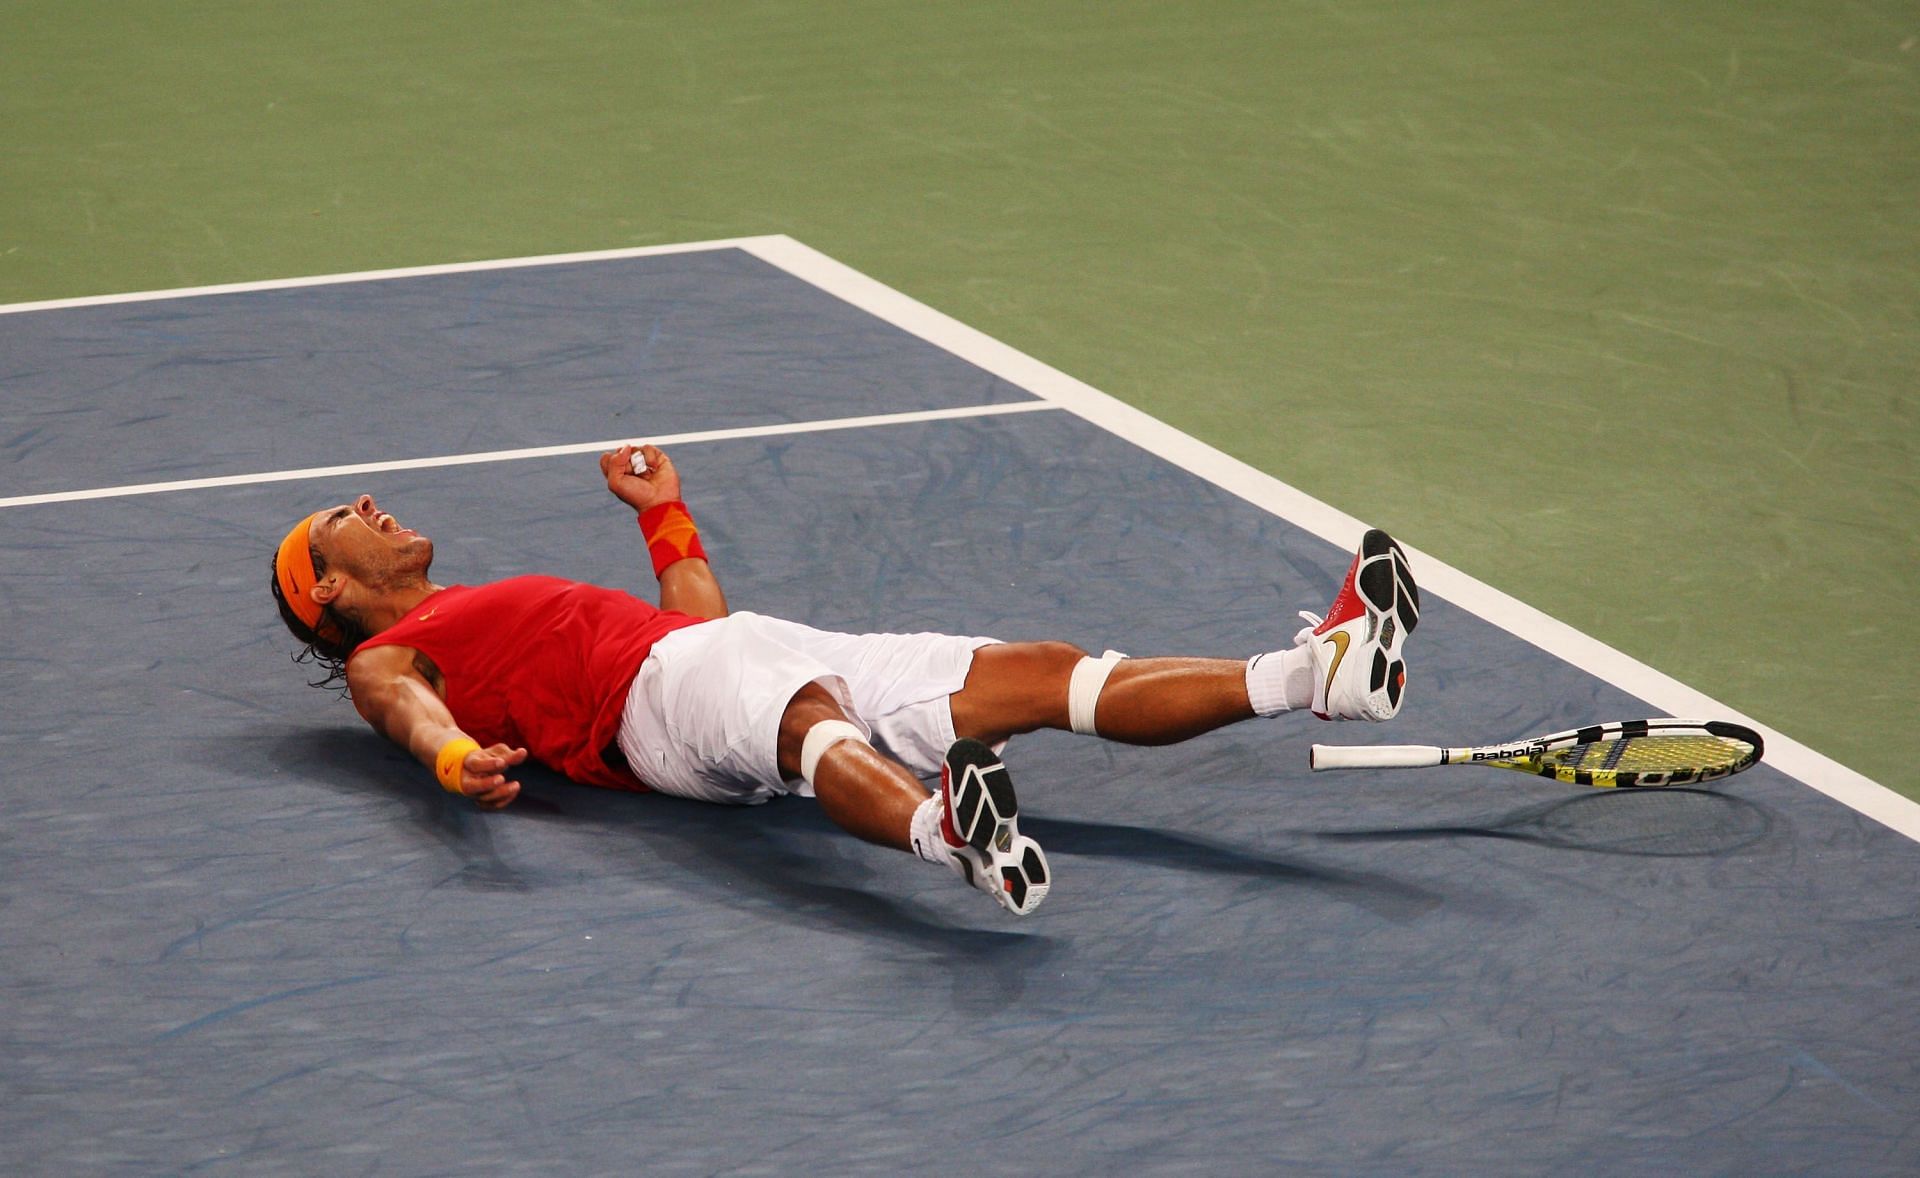 Nadal after winning the gold medal match at the Beijing Olympics.